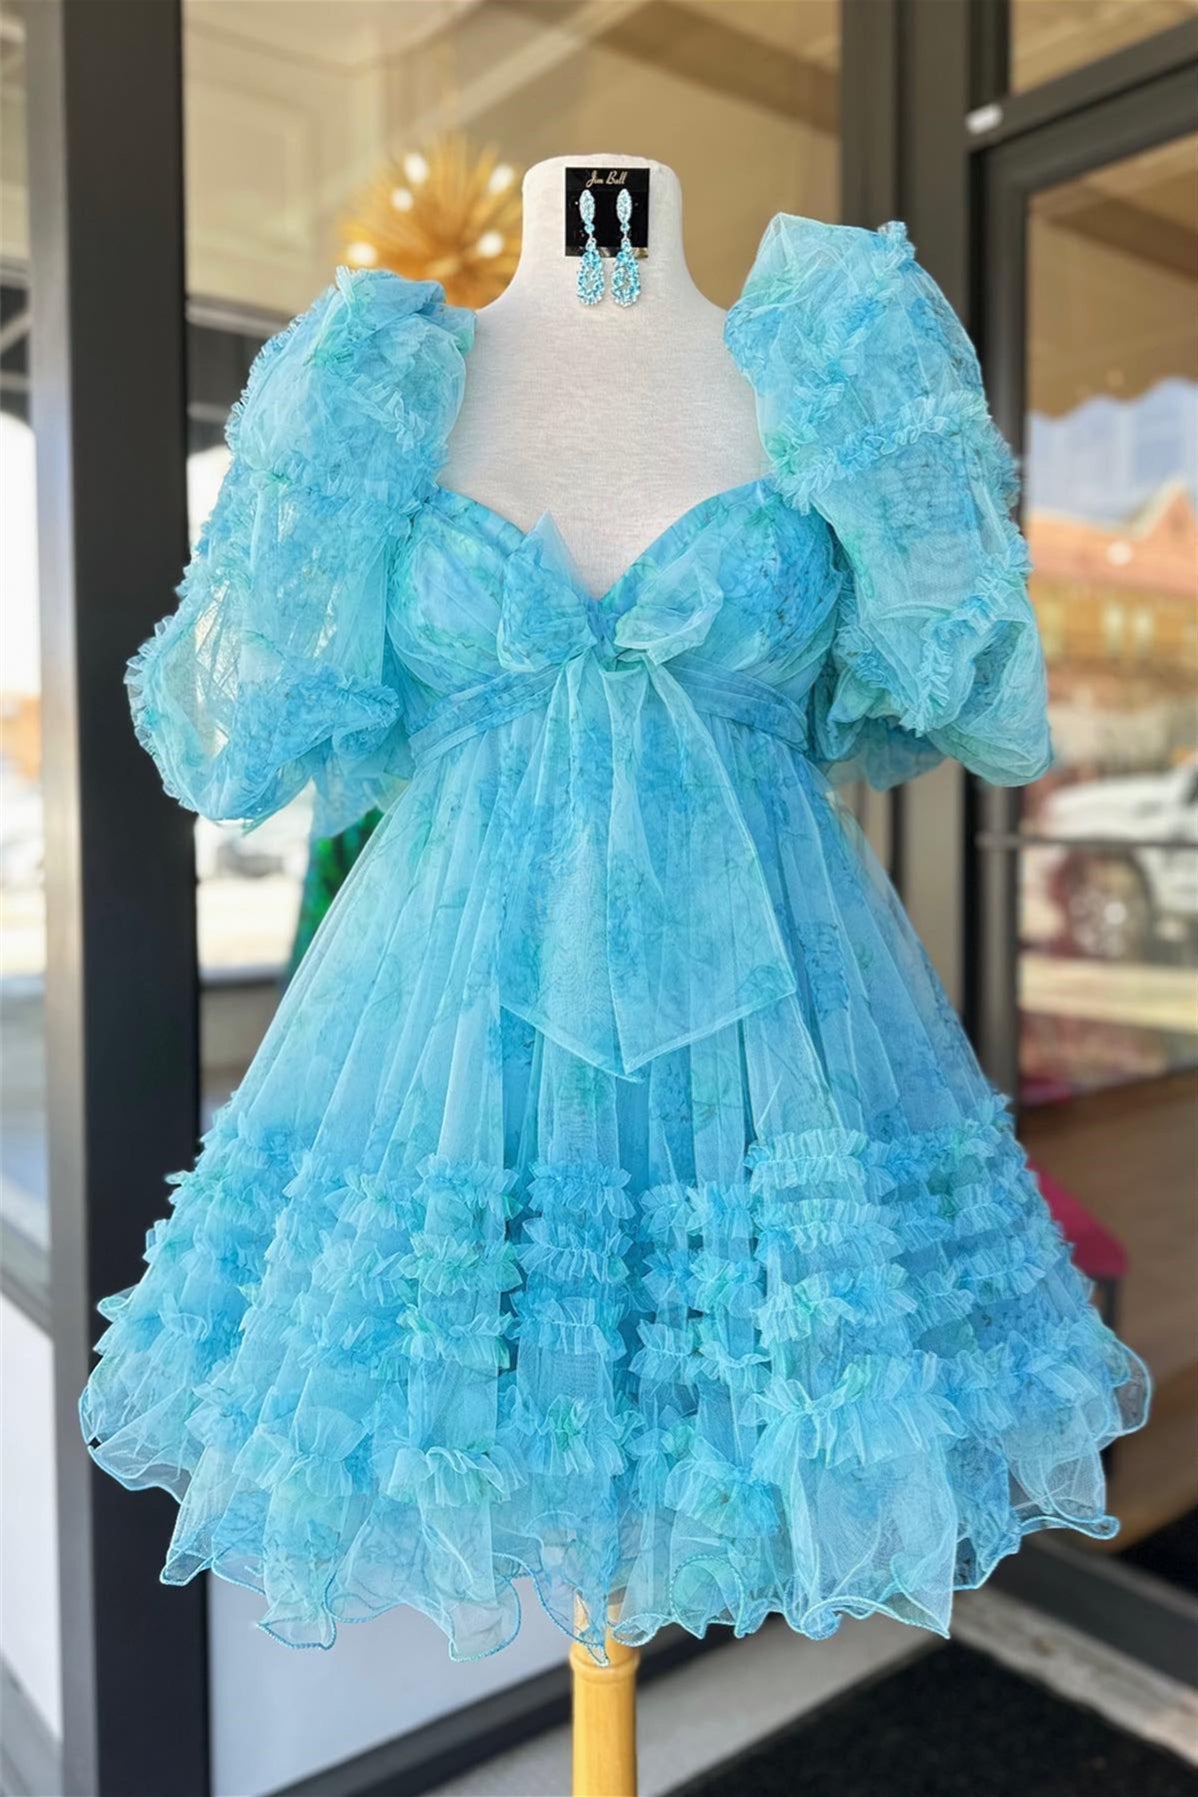 Blue Puff Sleeves Ruffles Babydoll Homecoming Dress with Bow